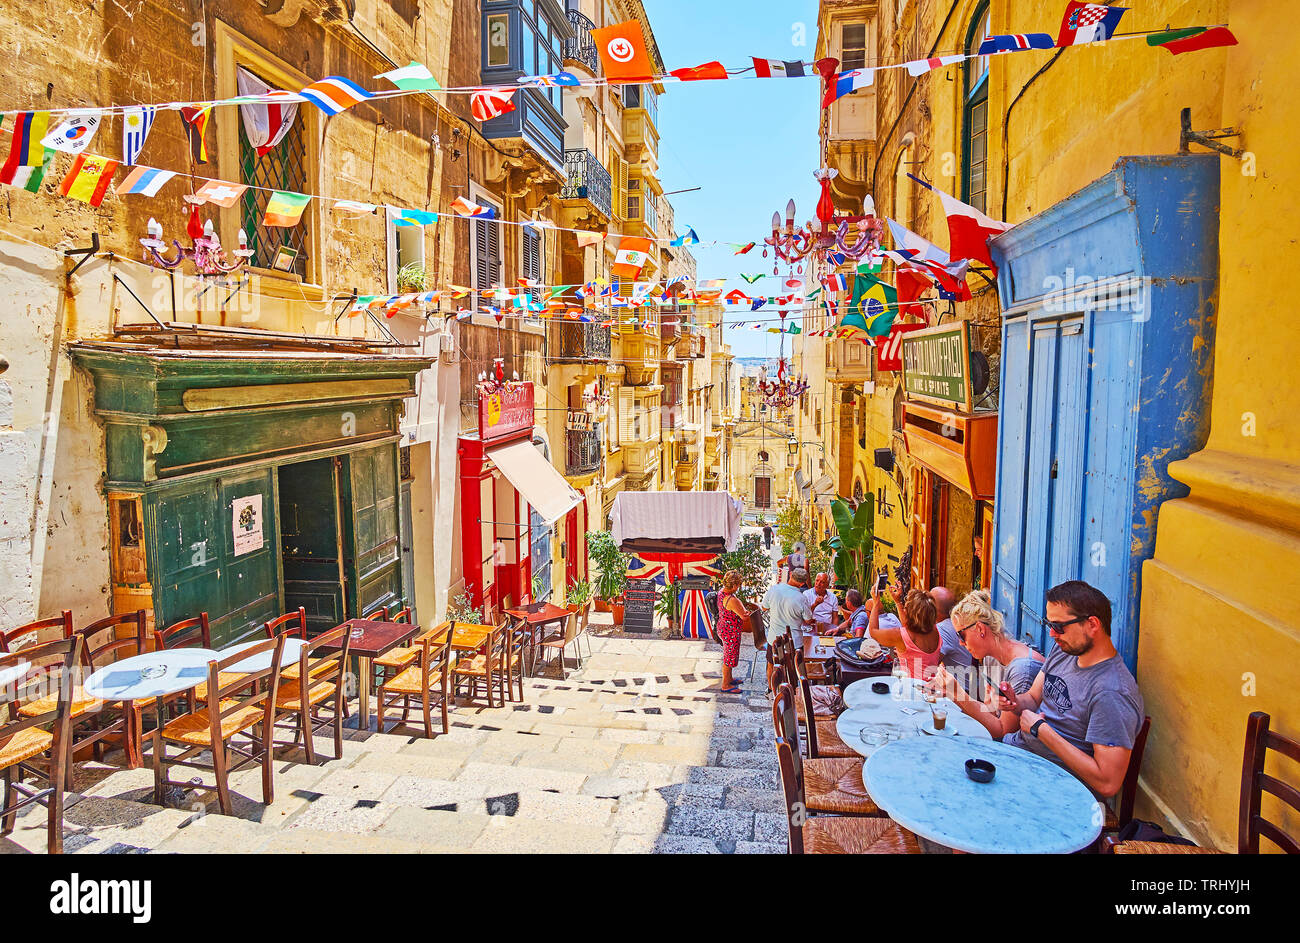 VALLETTA, MALTA - JUNE 19, 2018: The tables of cozy outdoor bar stretch along the descent of St Lucia street, decorated with colorful flag garlands, o Stock Photo